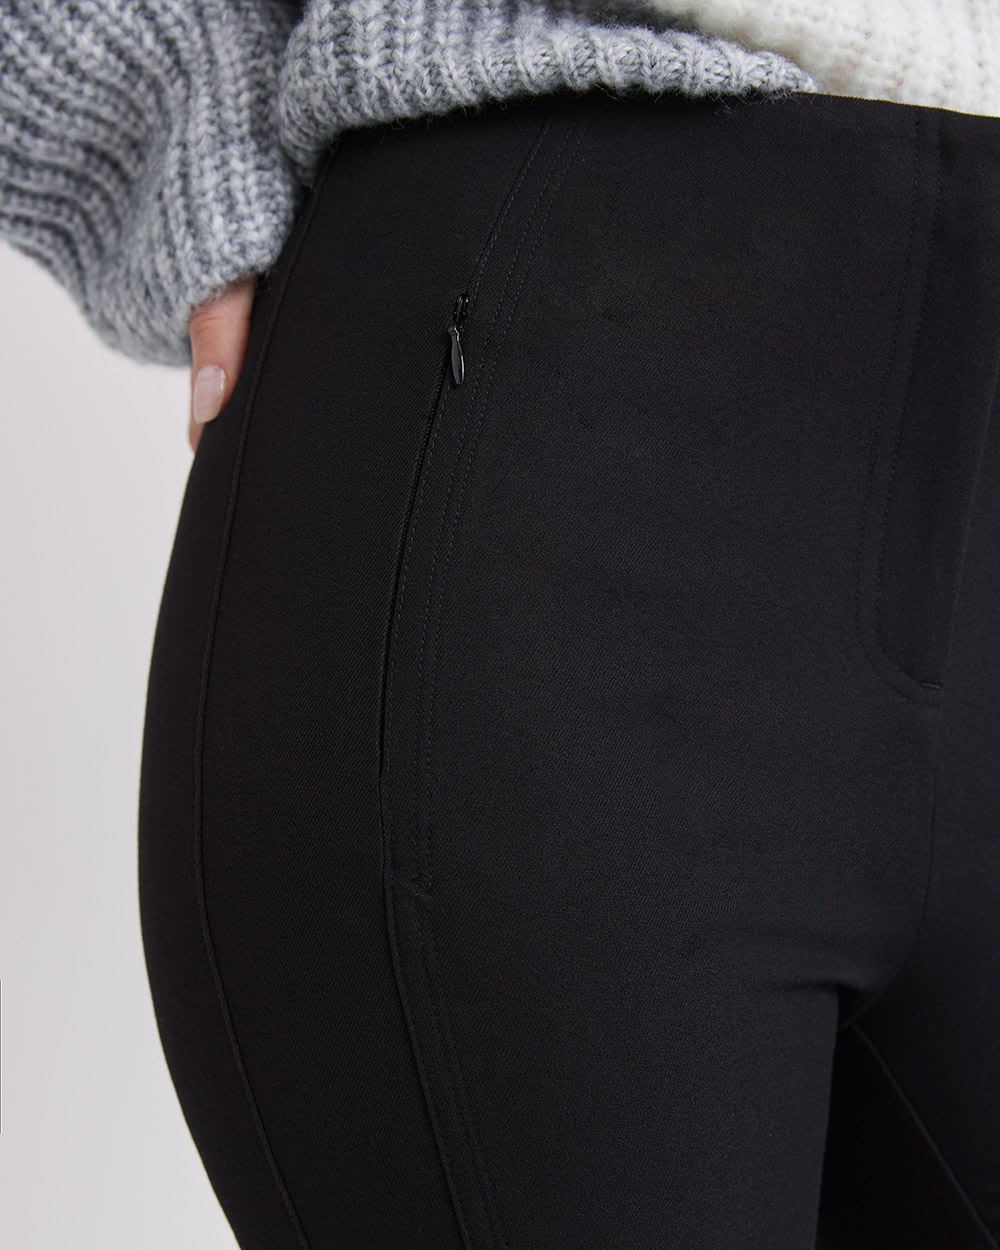 High-Rise Legging Pant with Zipper Fly